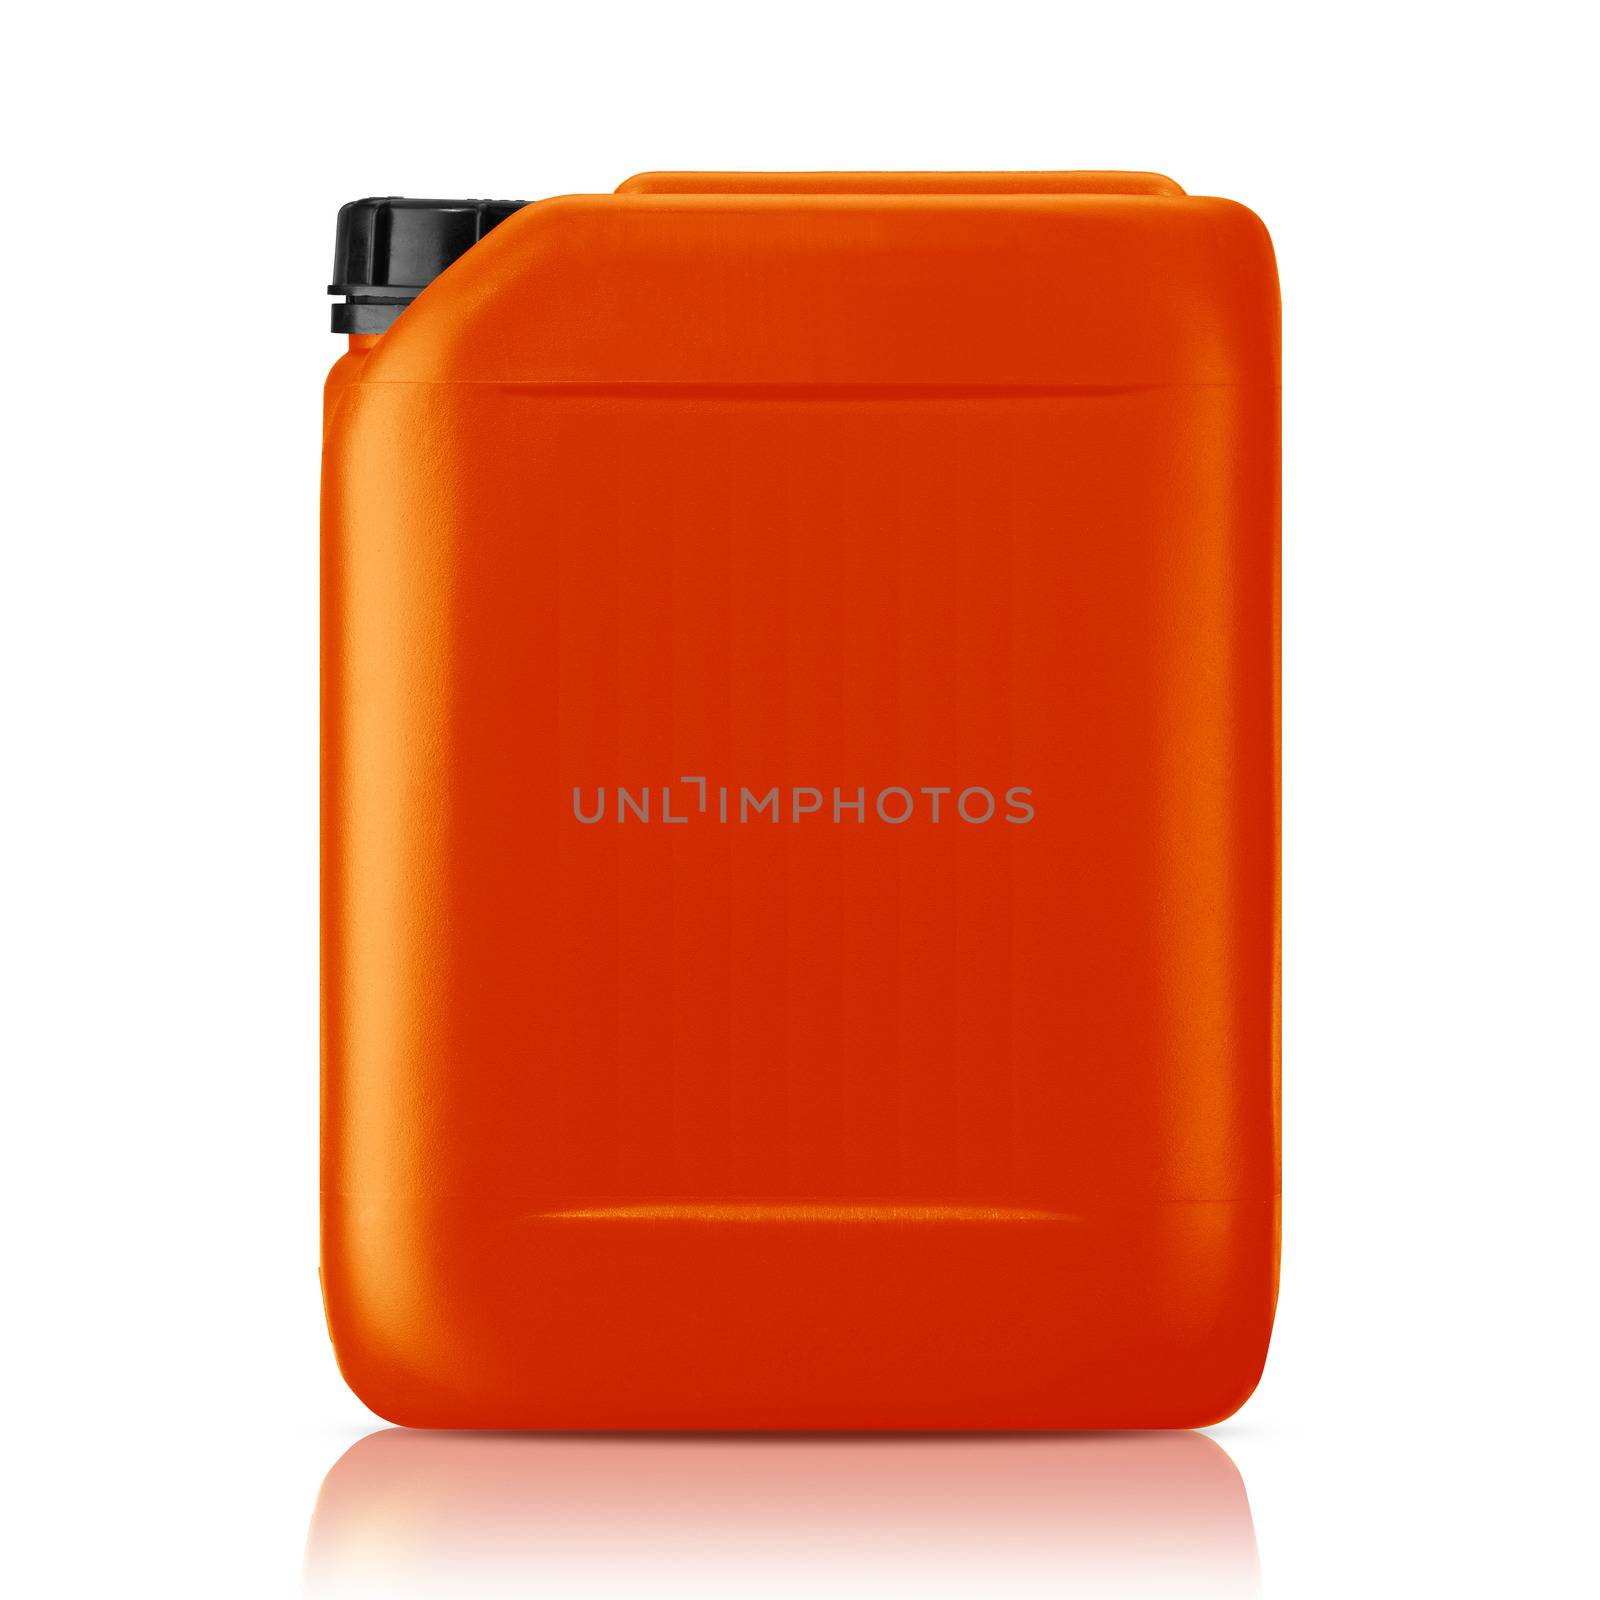 Orange plastic gallon, jerry can isolated on a white background. (with clipping work path)